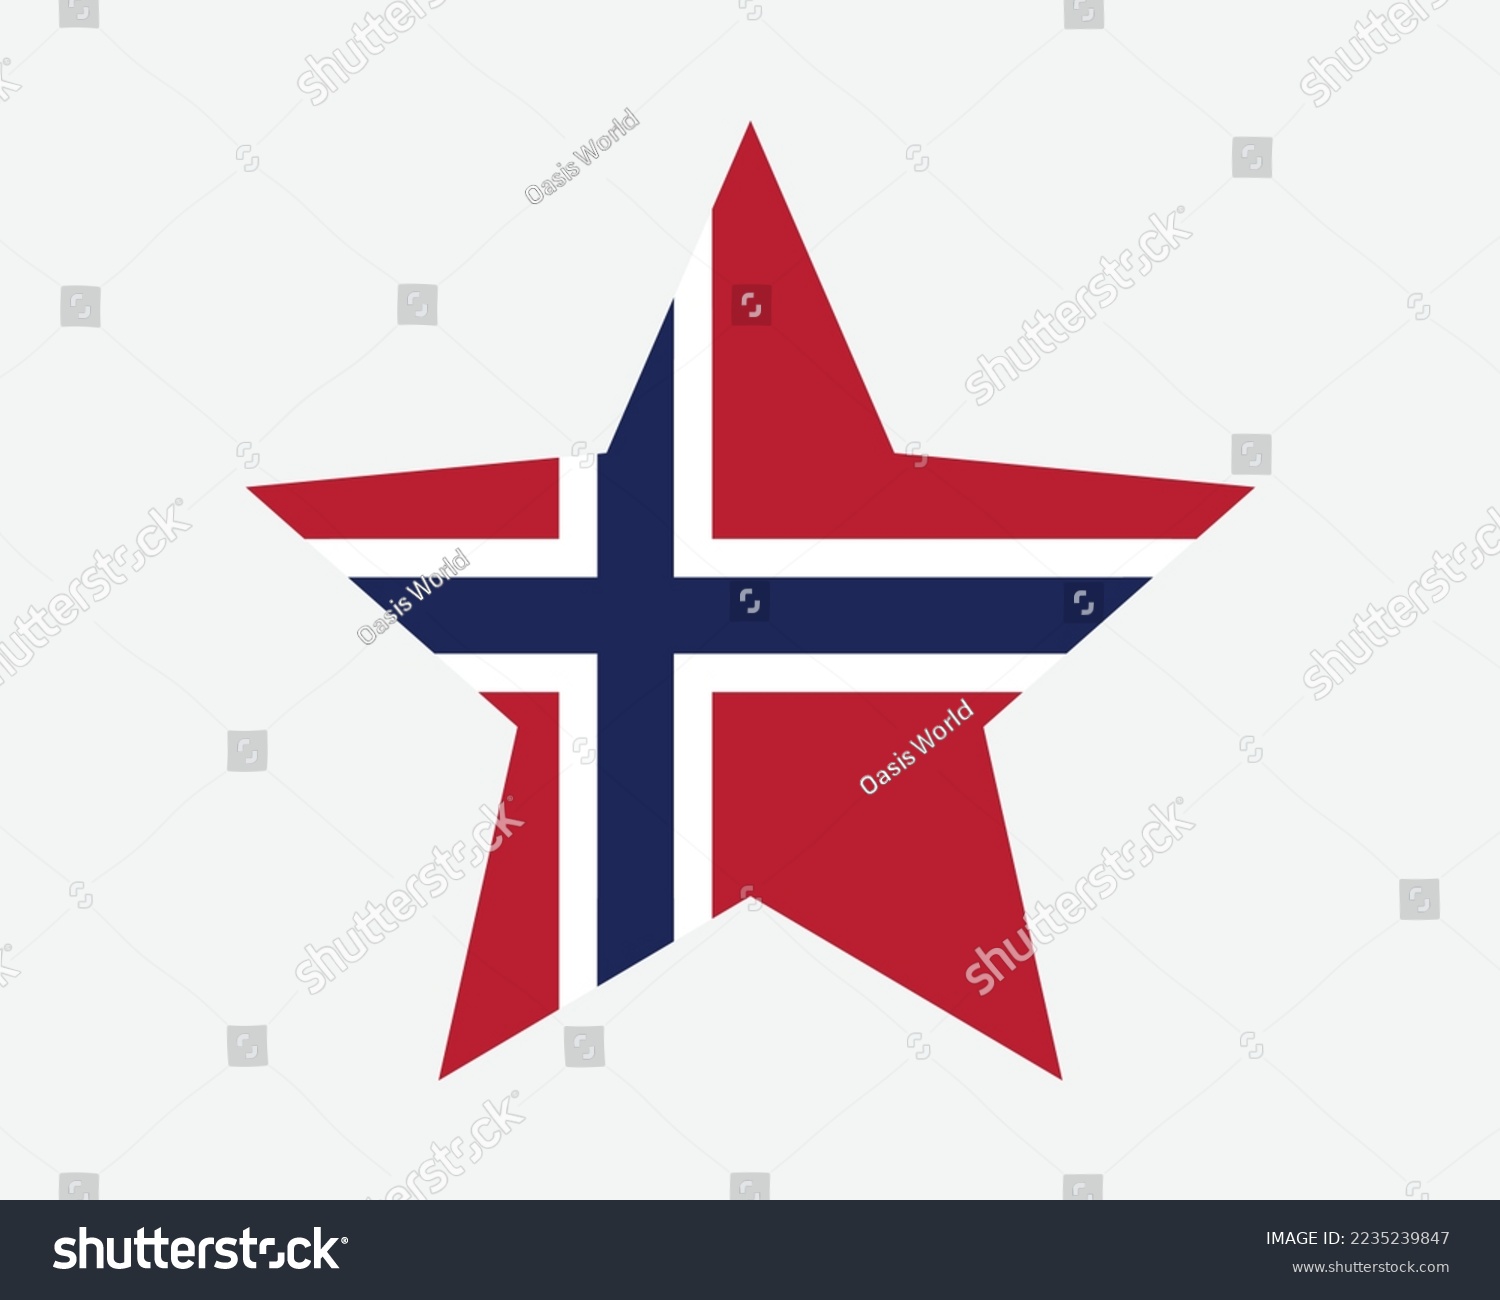 SVG of Norway Star Flag. Norwegian Star Shape Flag. Kingdom of Norway Country National Banner Icon Symbol Vector Flat Artwork Graphic Illustration svg